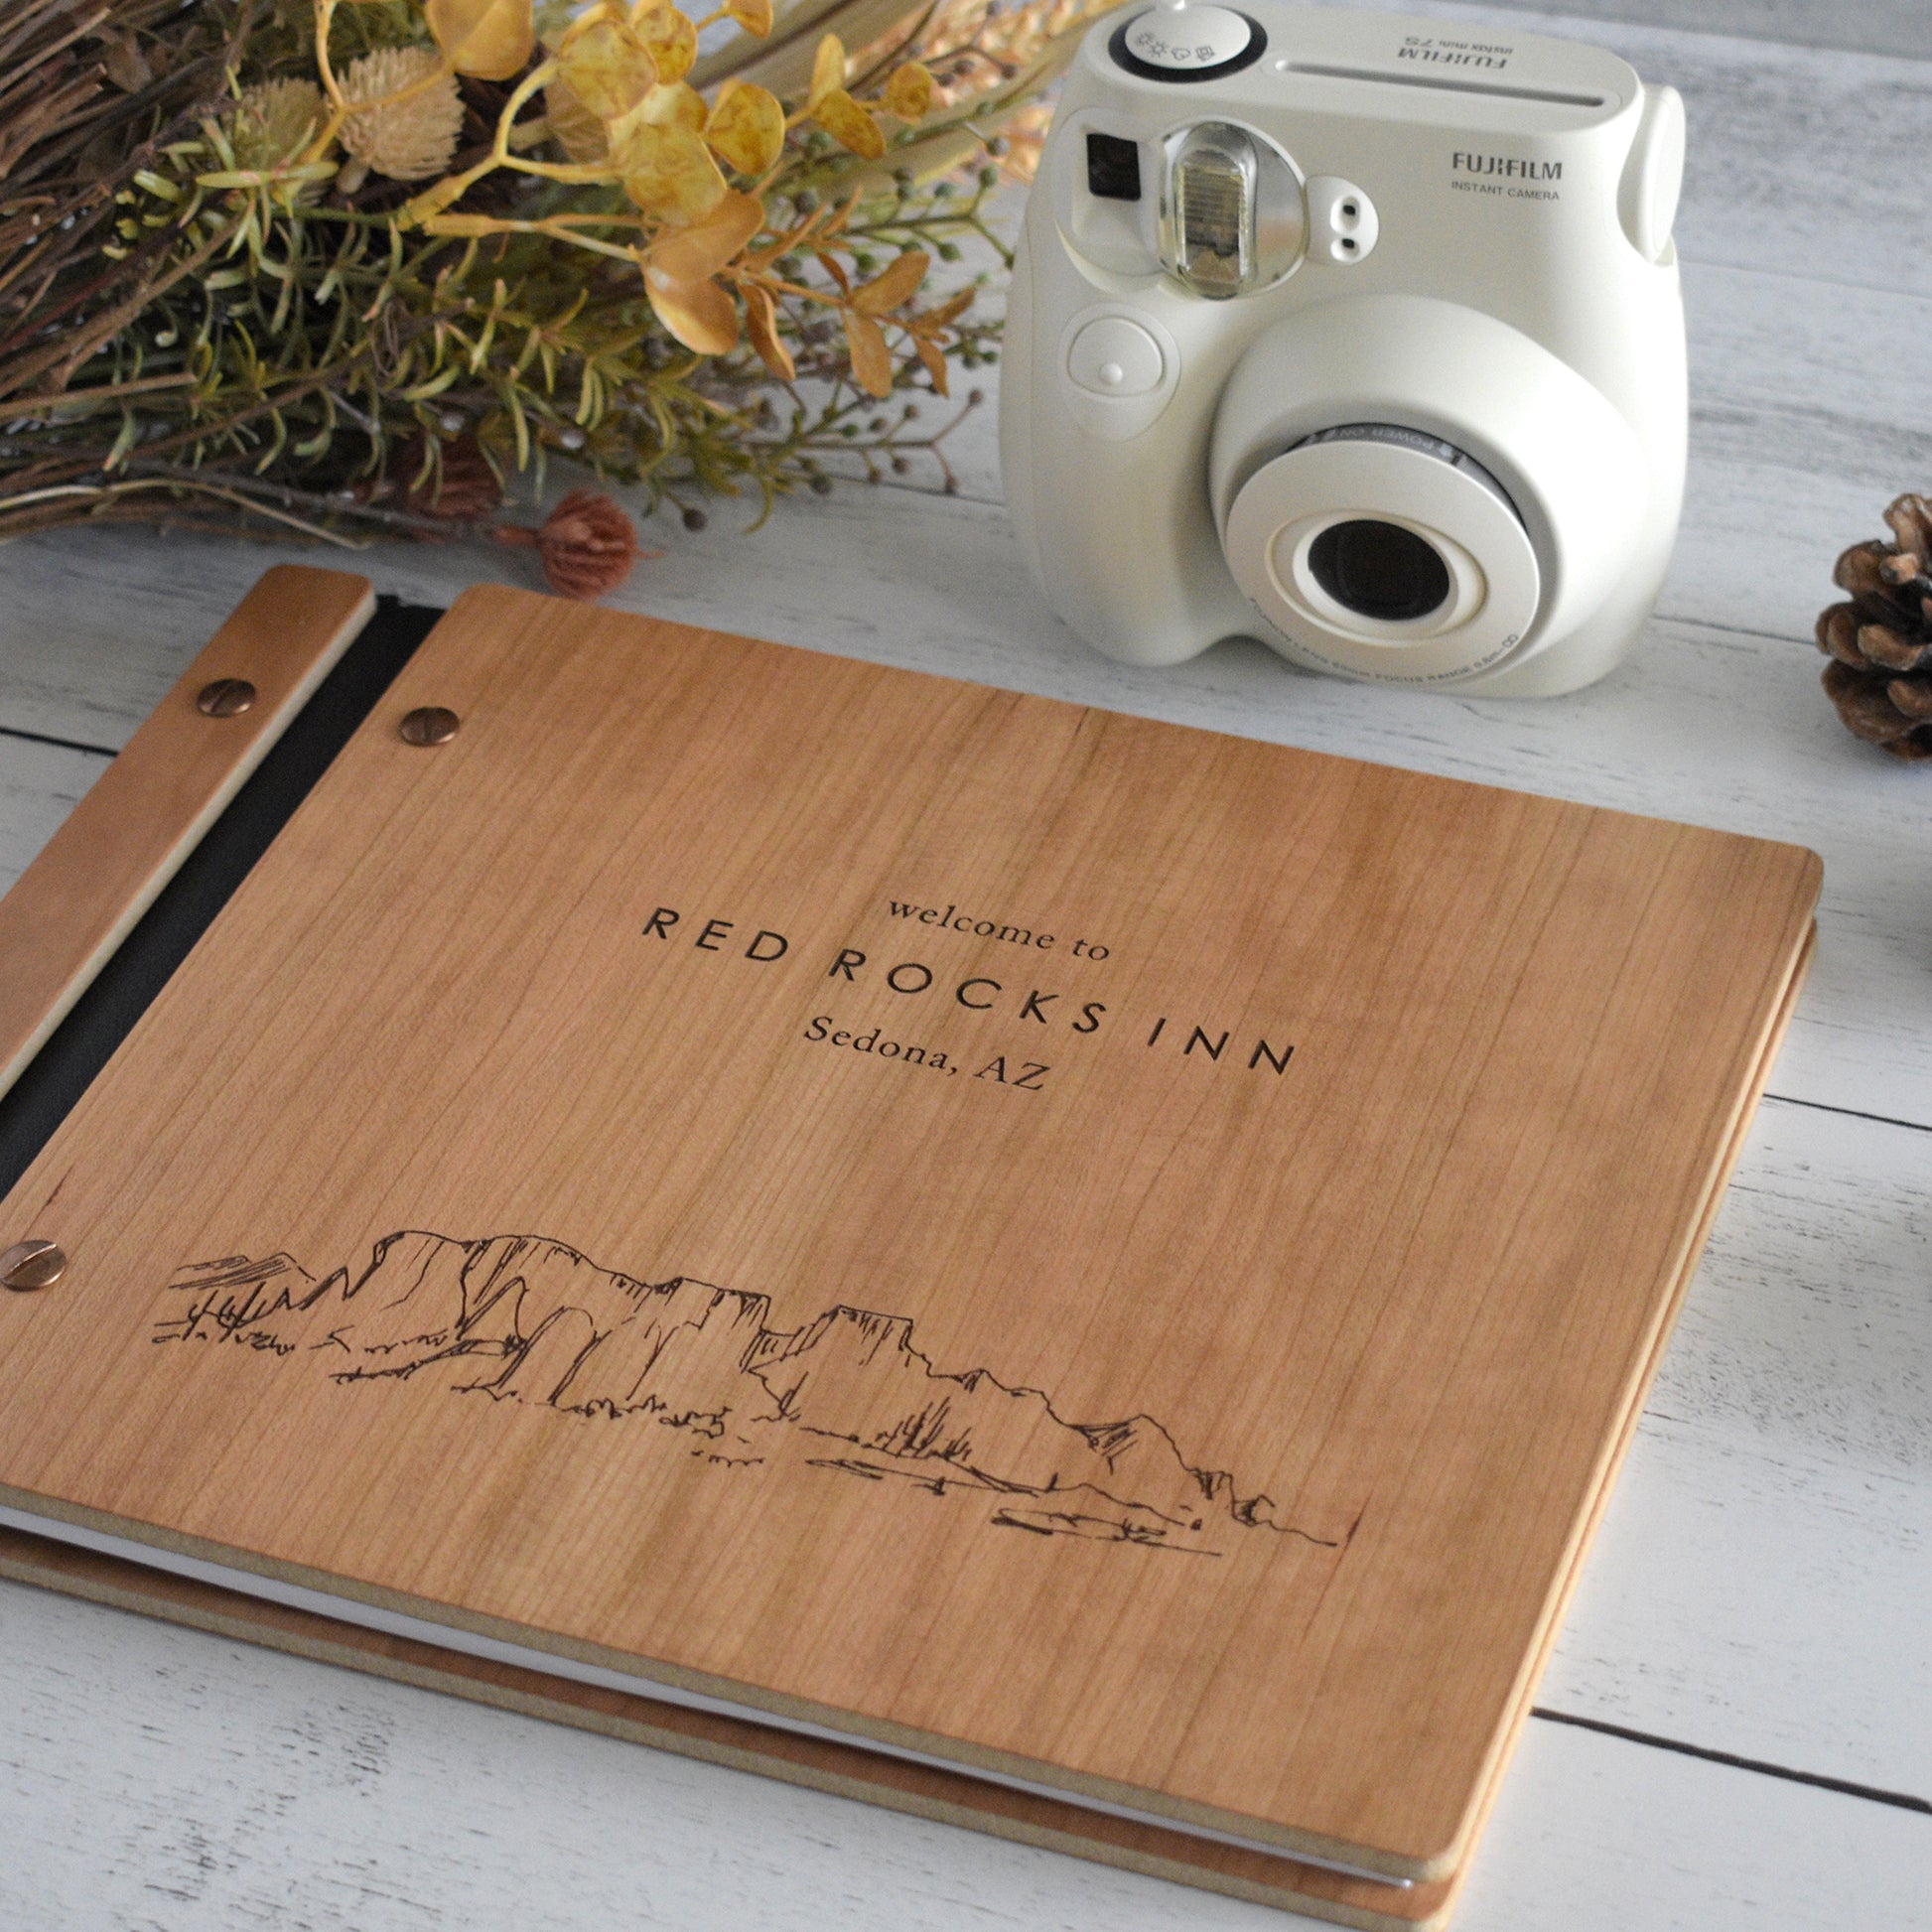 An 8.5x11" Airbnb guest book lies on a table. Made of cherry wood, black vegan leather binding, and copper hardware. The front cover reads Welcome to Red Rocks Inn, Sedona, AZ.